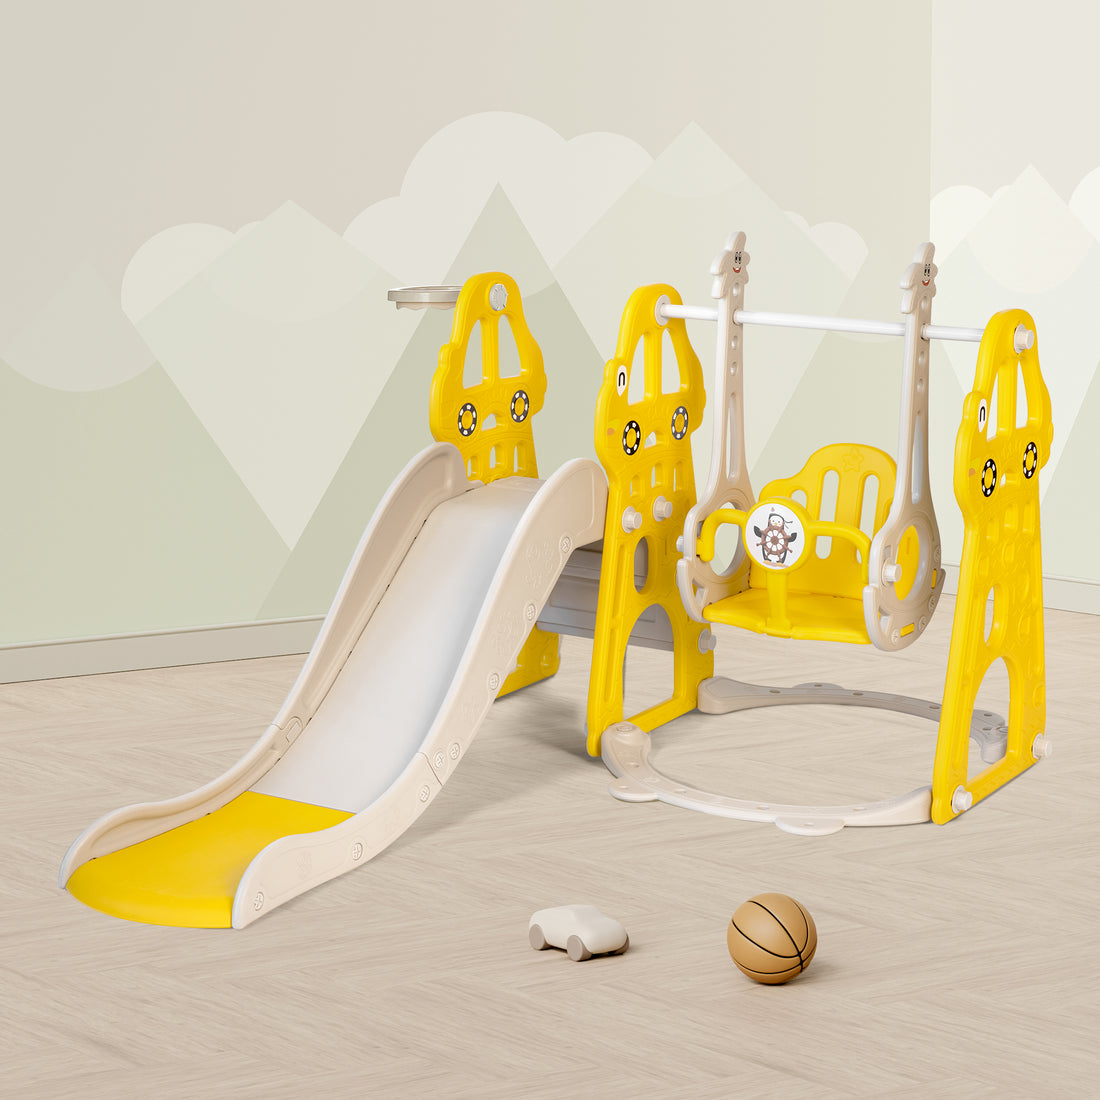 Duke Baby 4 in1 Swing and Slide Playset with Basketball Hoop - Yellow